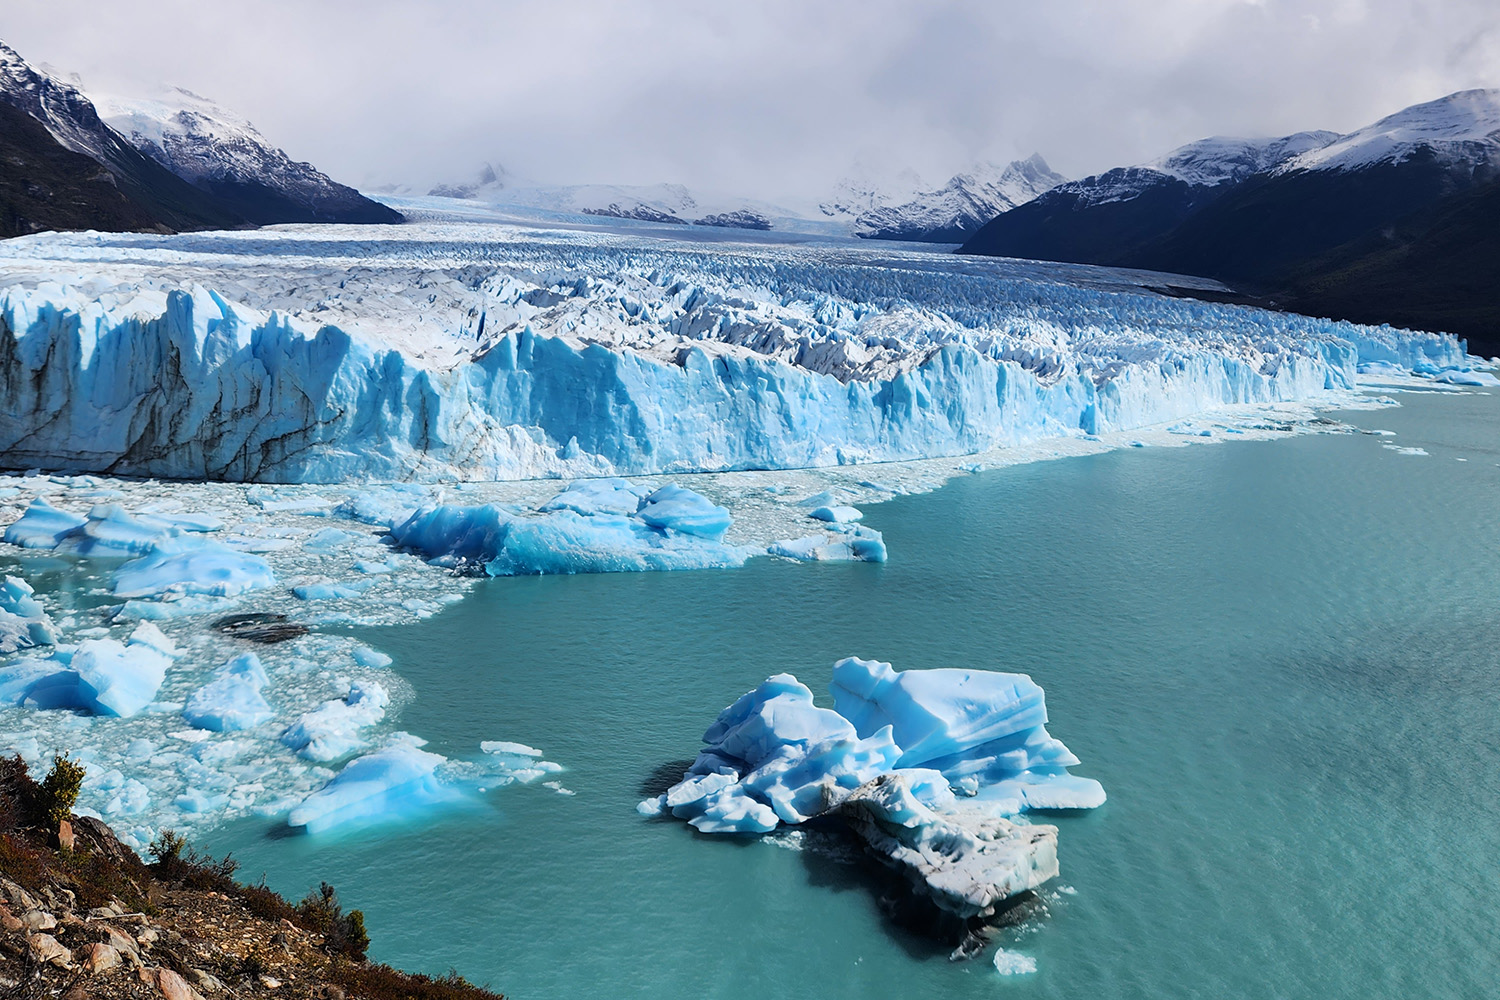 Best tours in El Calafate: Full Day tour to Perito Moreno Glacier and navigation along Argentino Lake